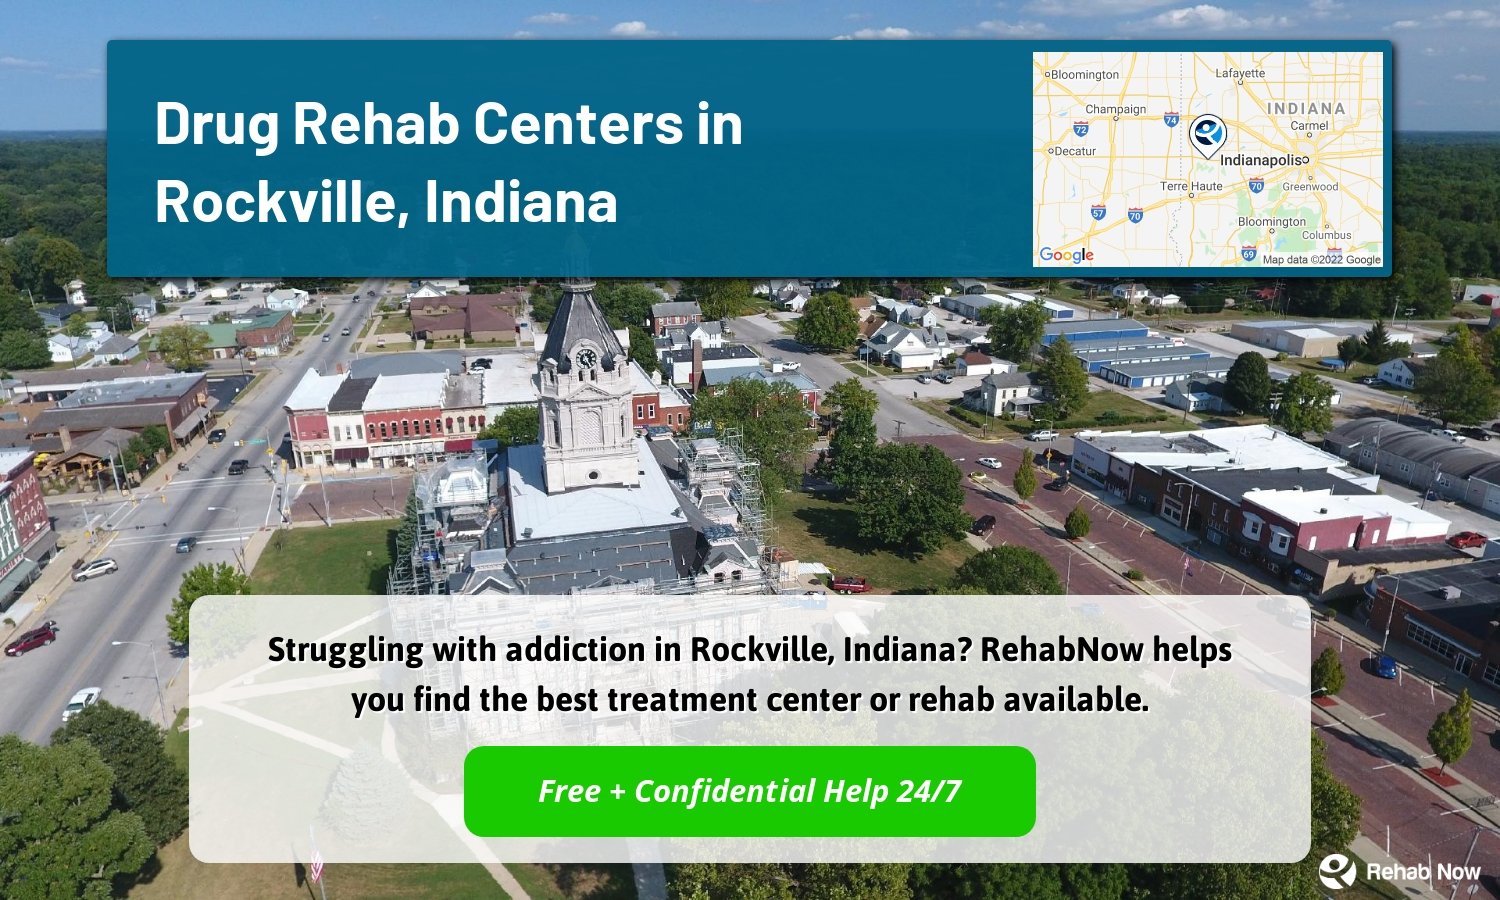 Struggling with addiction in Rockville, Indiana? RehabNow helps you find the best treatment center or rehab available.